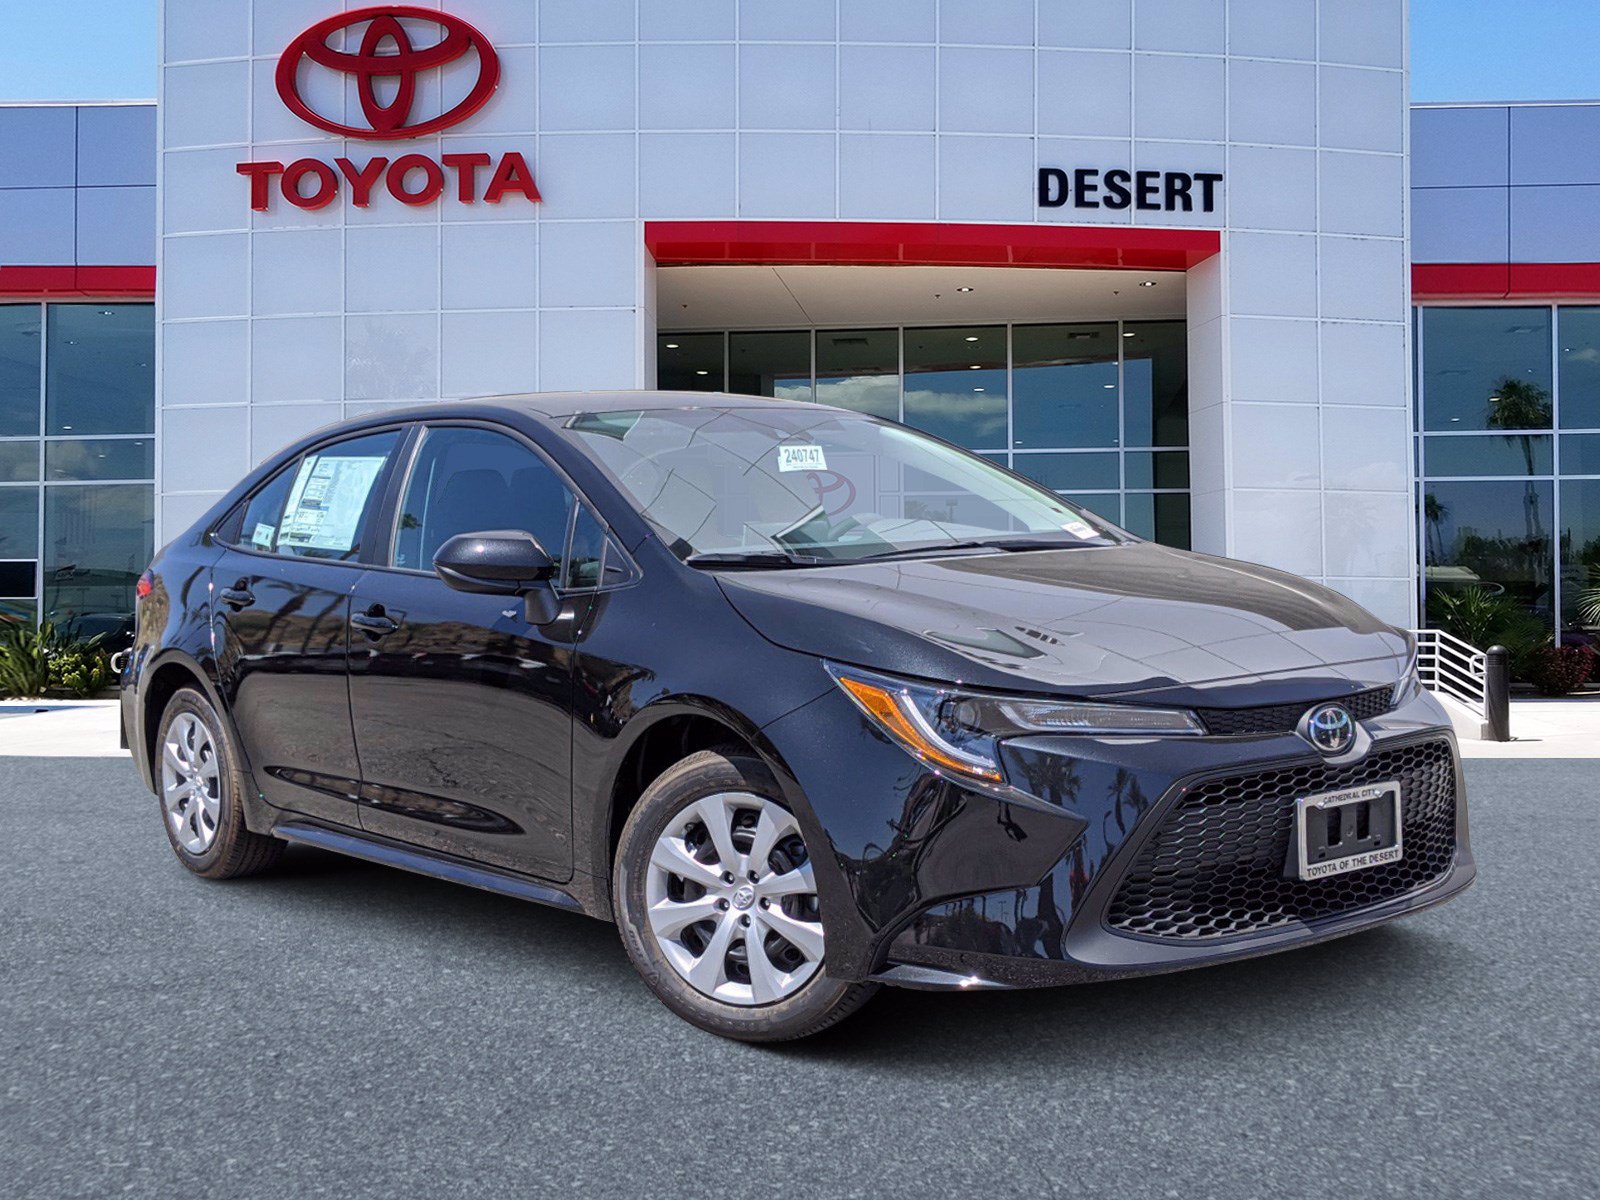 New 2020 Toyota Corolla LE 4dr Car in Cathedral City #240747 | Toyota ...